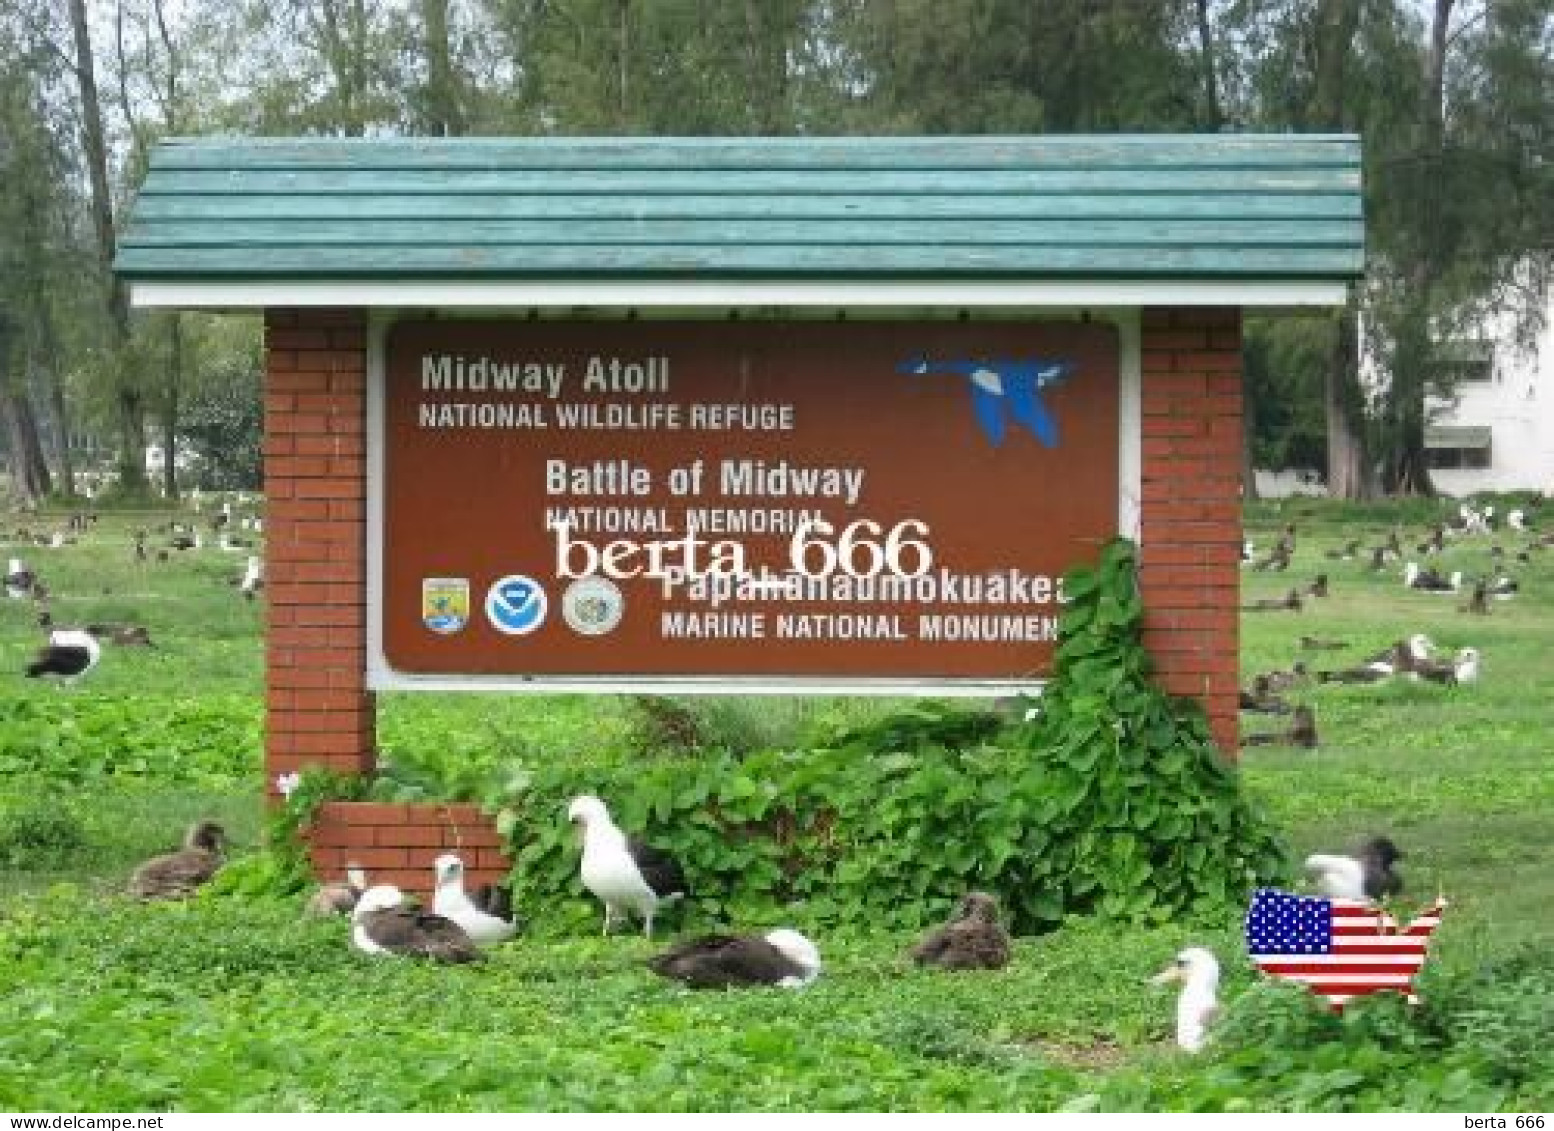 United States Midway Atoll Battle Memorial Sign New Postcard - Midway